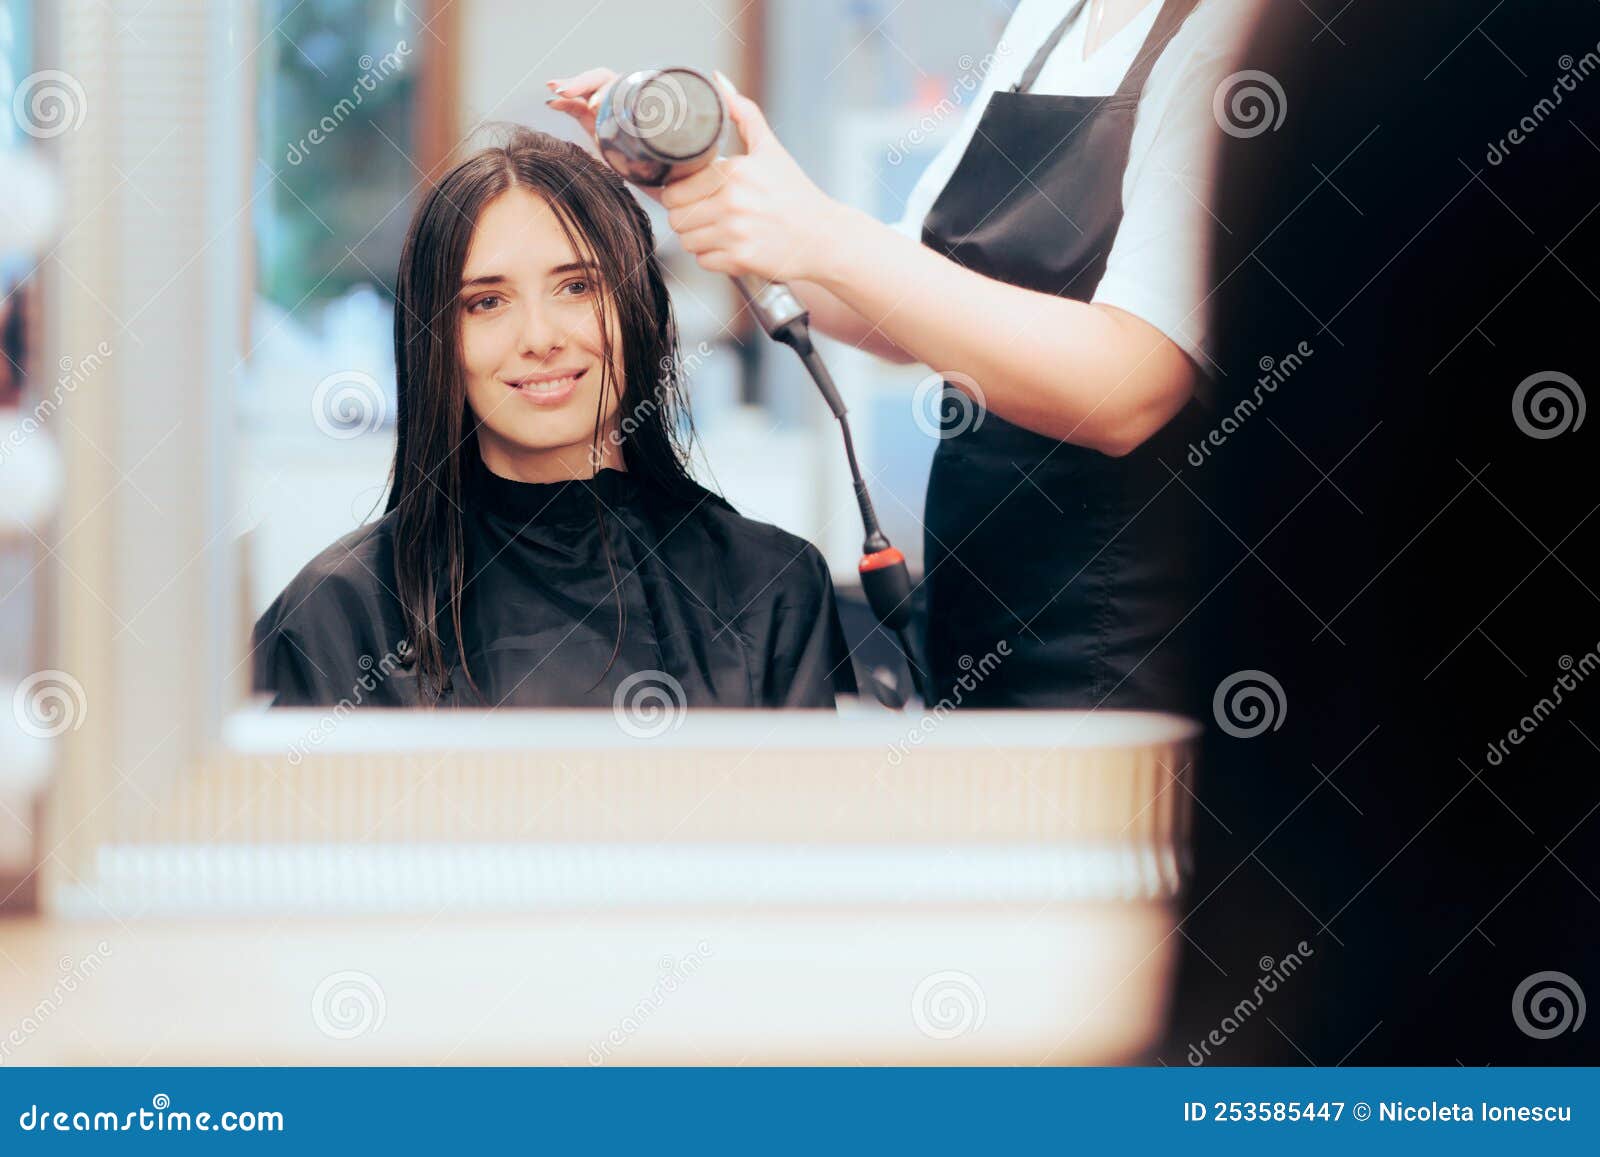 Woman with Wet Hair Ready To Get a Professional Blowout Stock Image - Image  of drying, hairstylist: 253585447